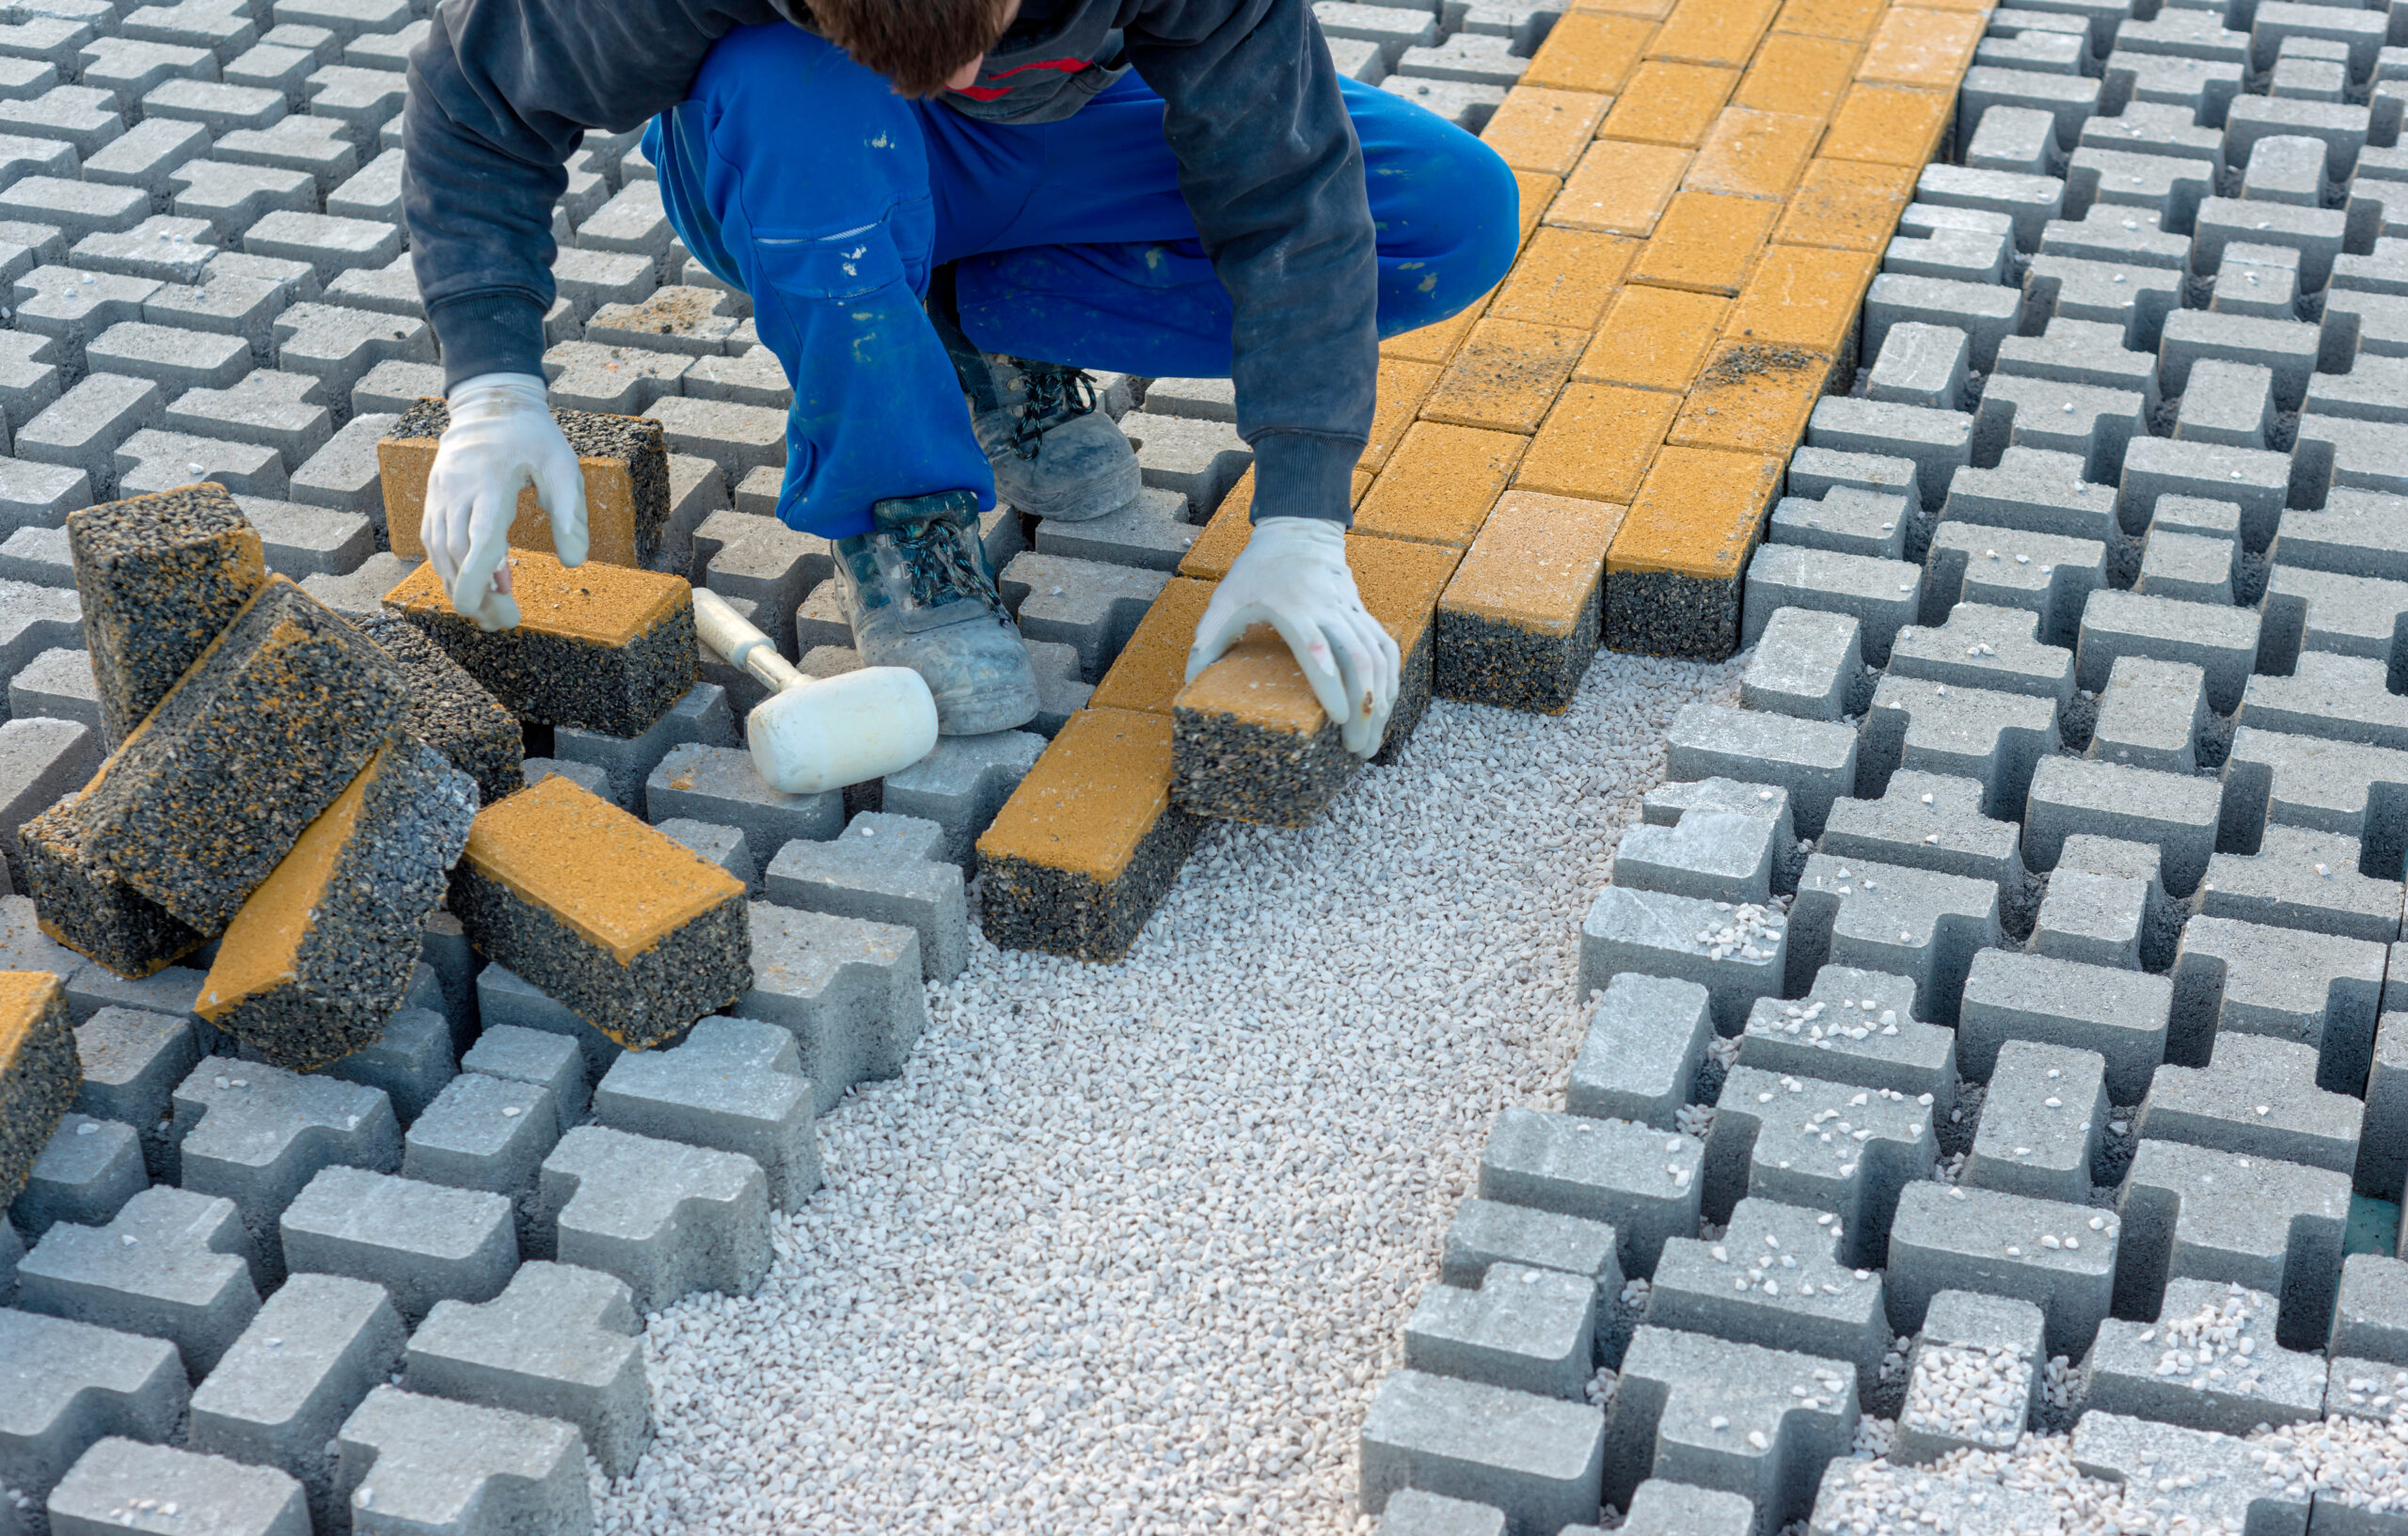 Paving stone worker is putting down pavers during a construction of a city street onto sheet nonwoven bedding sand and fitting them into place.